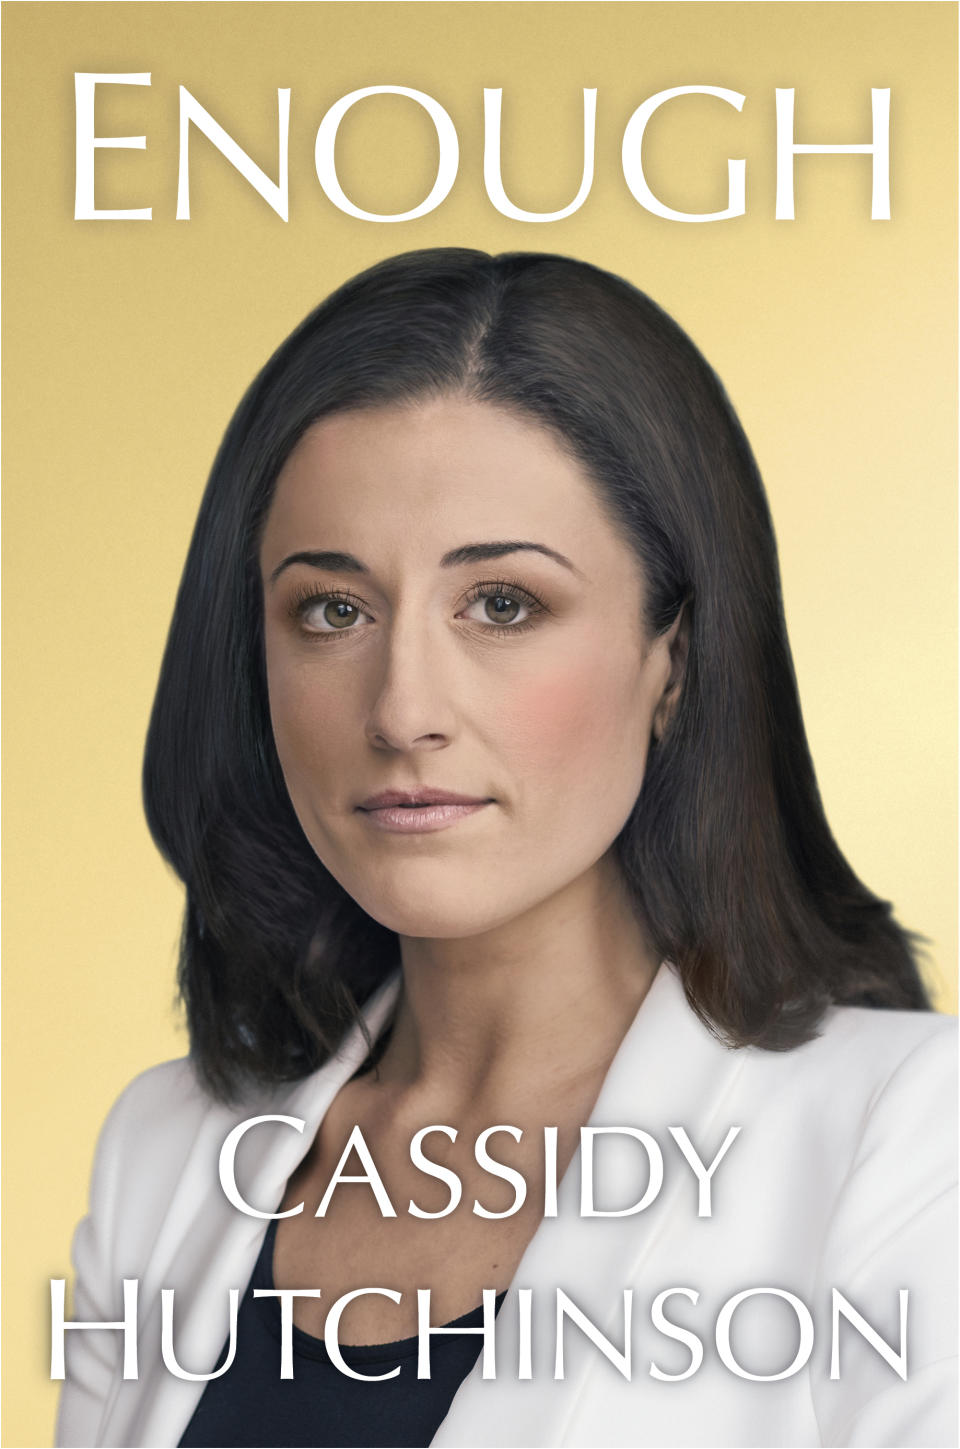 This book cover image released by Simon & Schuster shows "Enough" by former Trump White House aide Cassidy Hutchinson. (Simon & Schuster via AP)